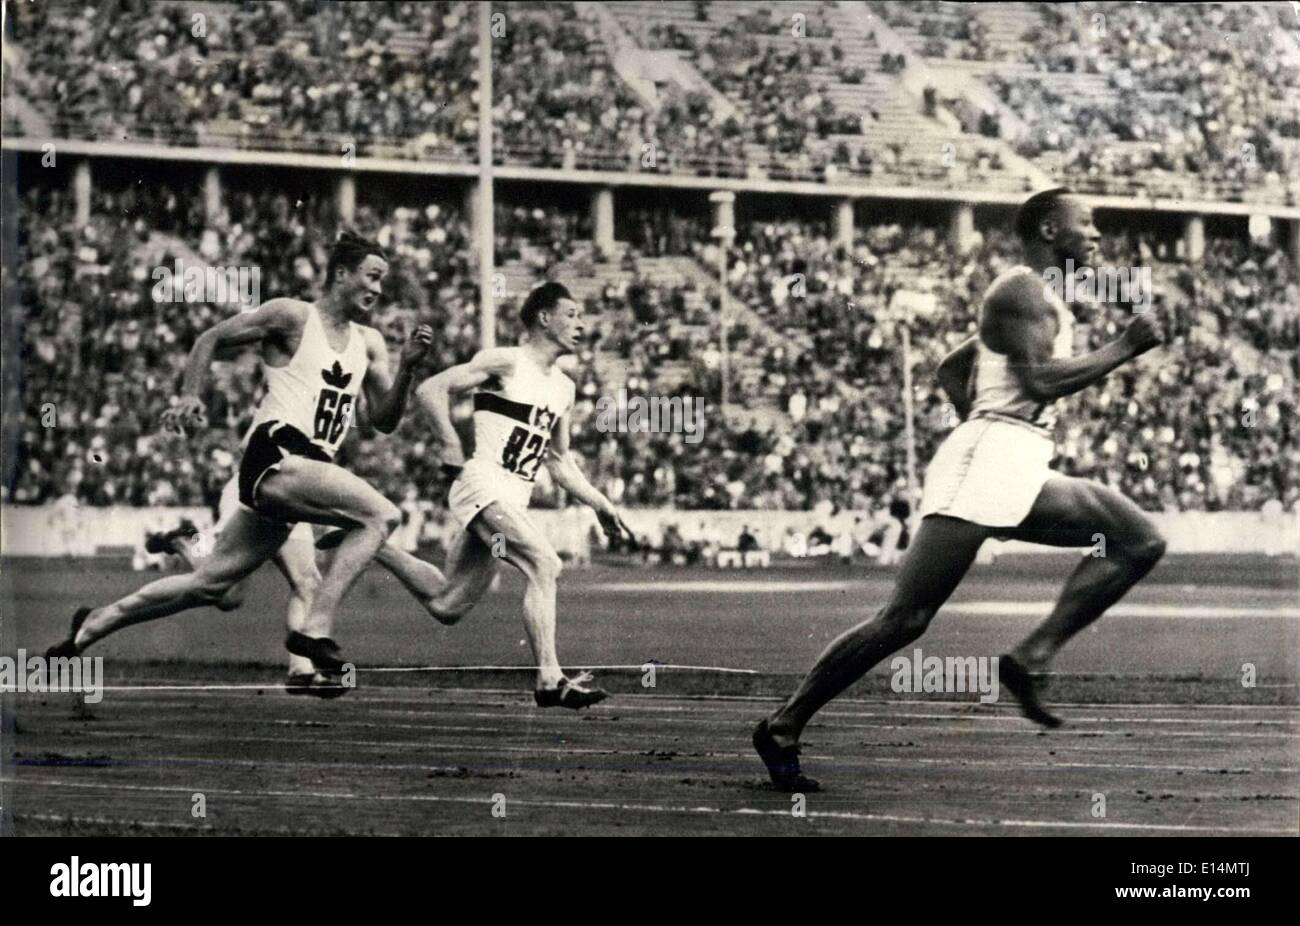 Apr. 05, 2012 - Berlin Olympics: Jesse Owens beating the 200 meter record in 20.7 seconds (time according to Associated Press Almanac) Stock Photo